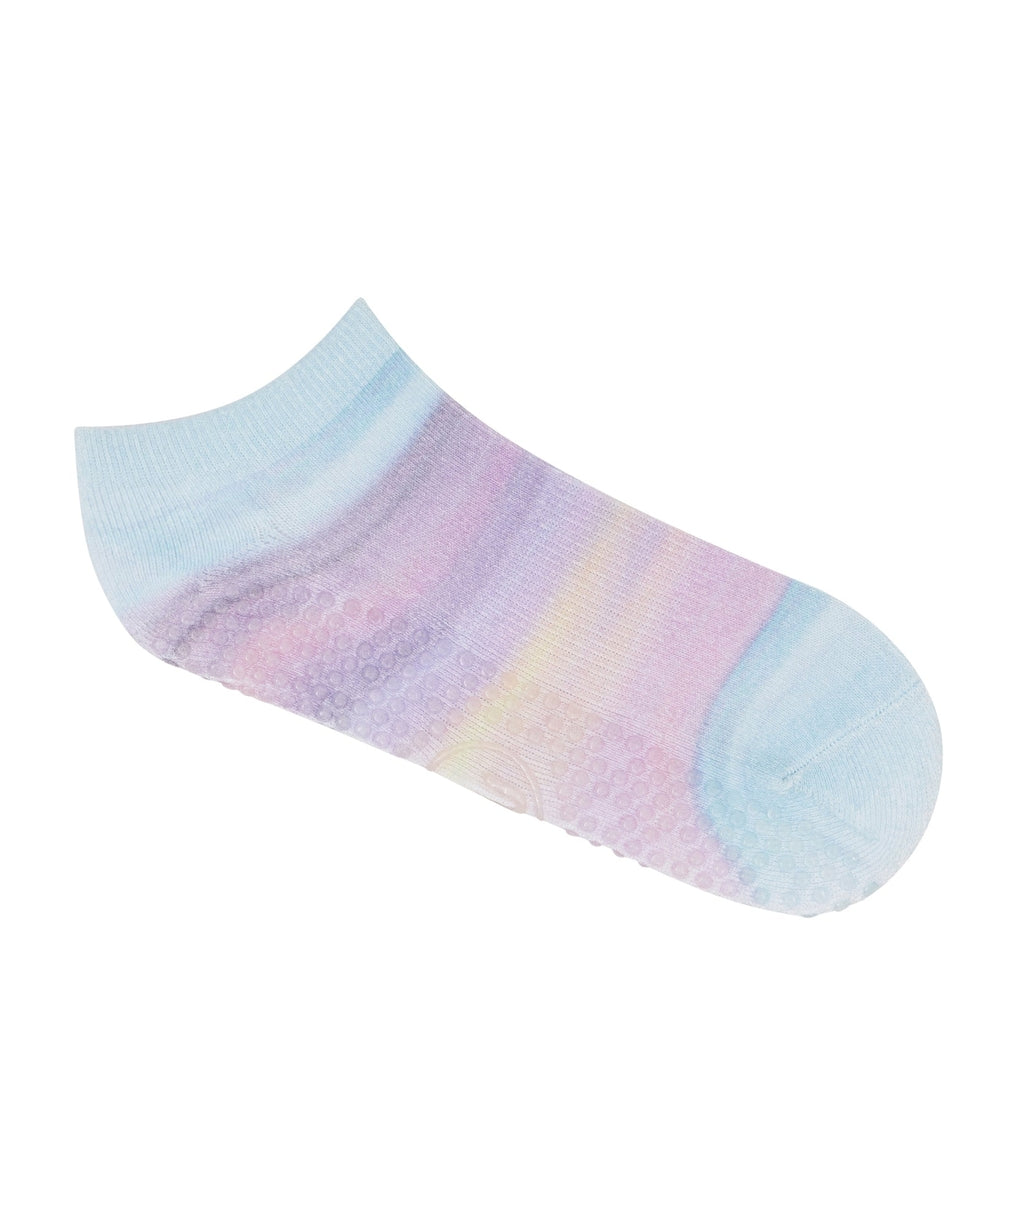 MoveActive Classic Low Rise Grip Socks